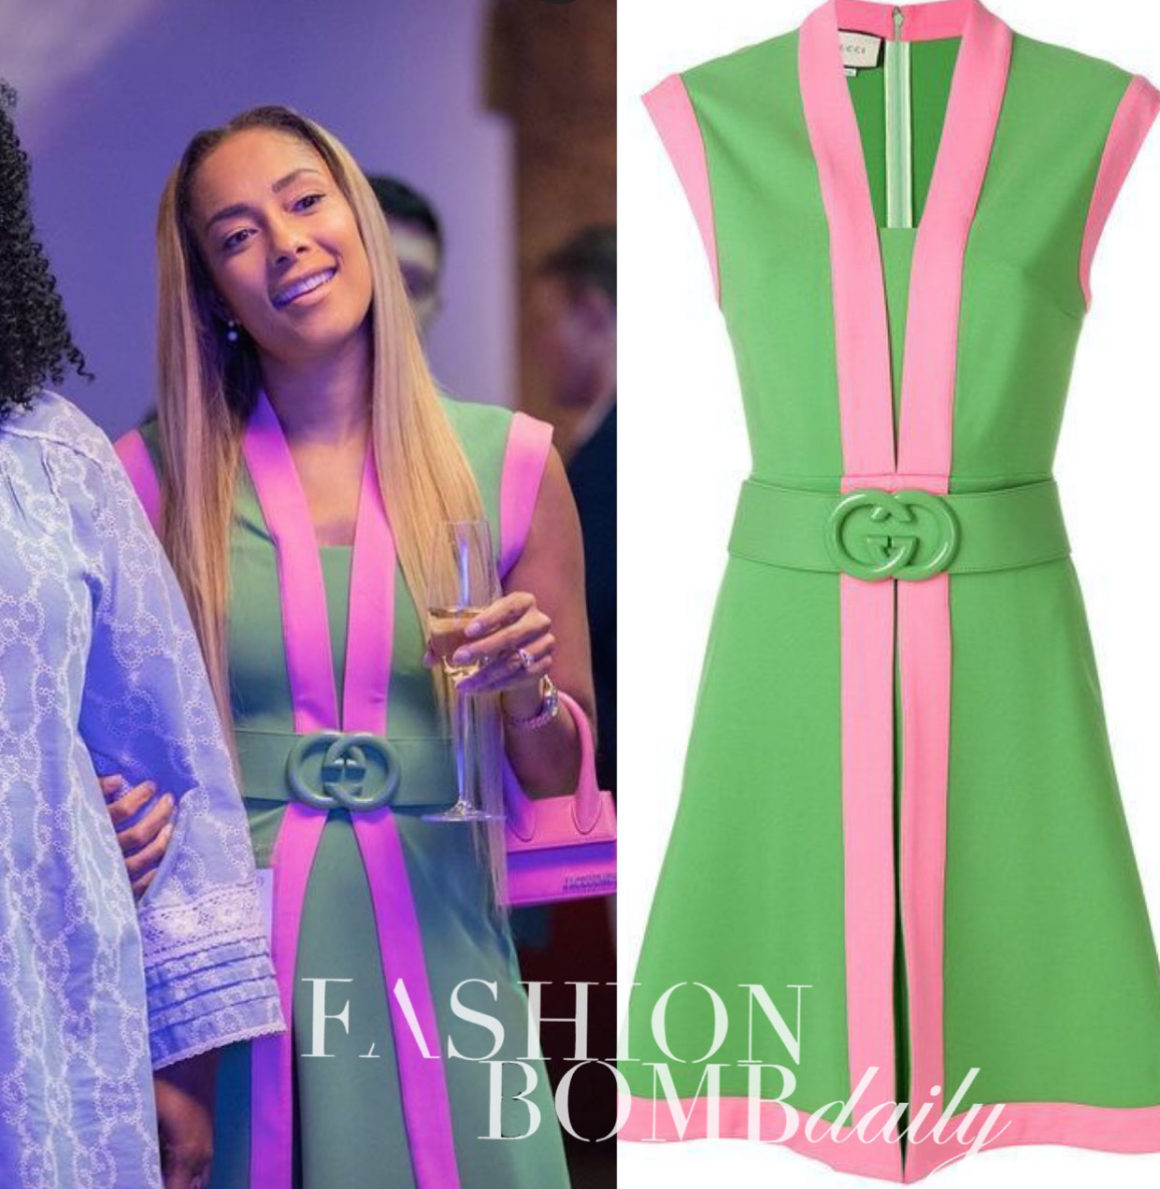 9090 Insecure Season 5 Episode 1 Fashion Credits Issa Rae in Plaid Ombre Dries van Noten Amanda Seales in Gucci Pink and Green and Yvonne Orji in Peach Sally LaPointe